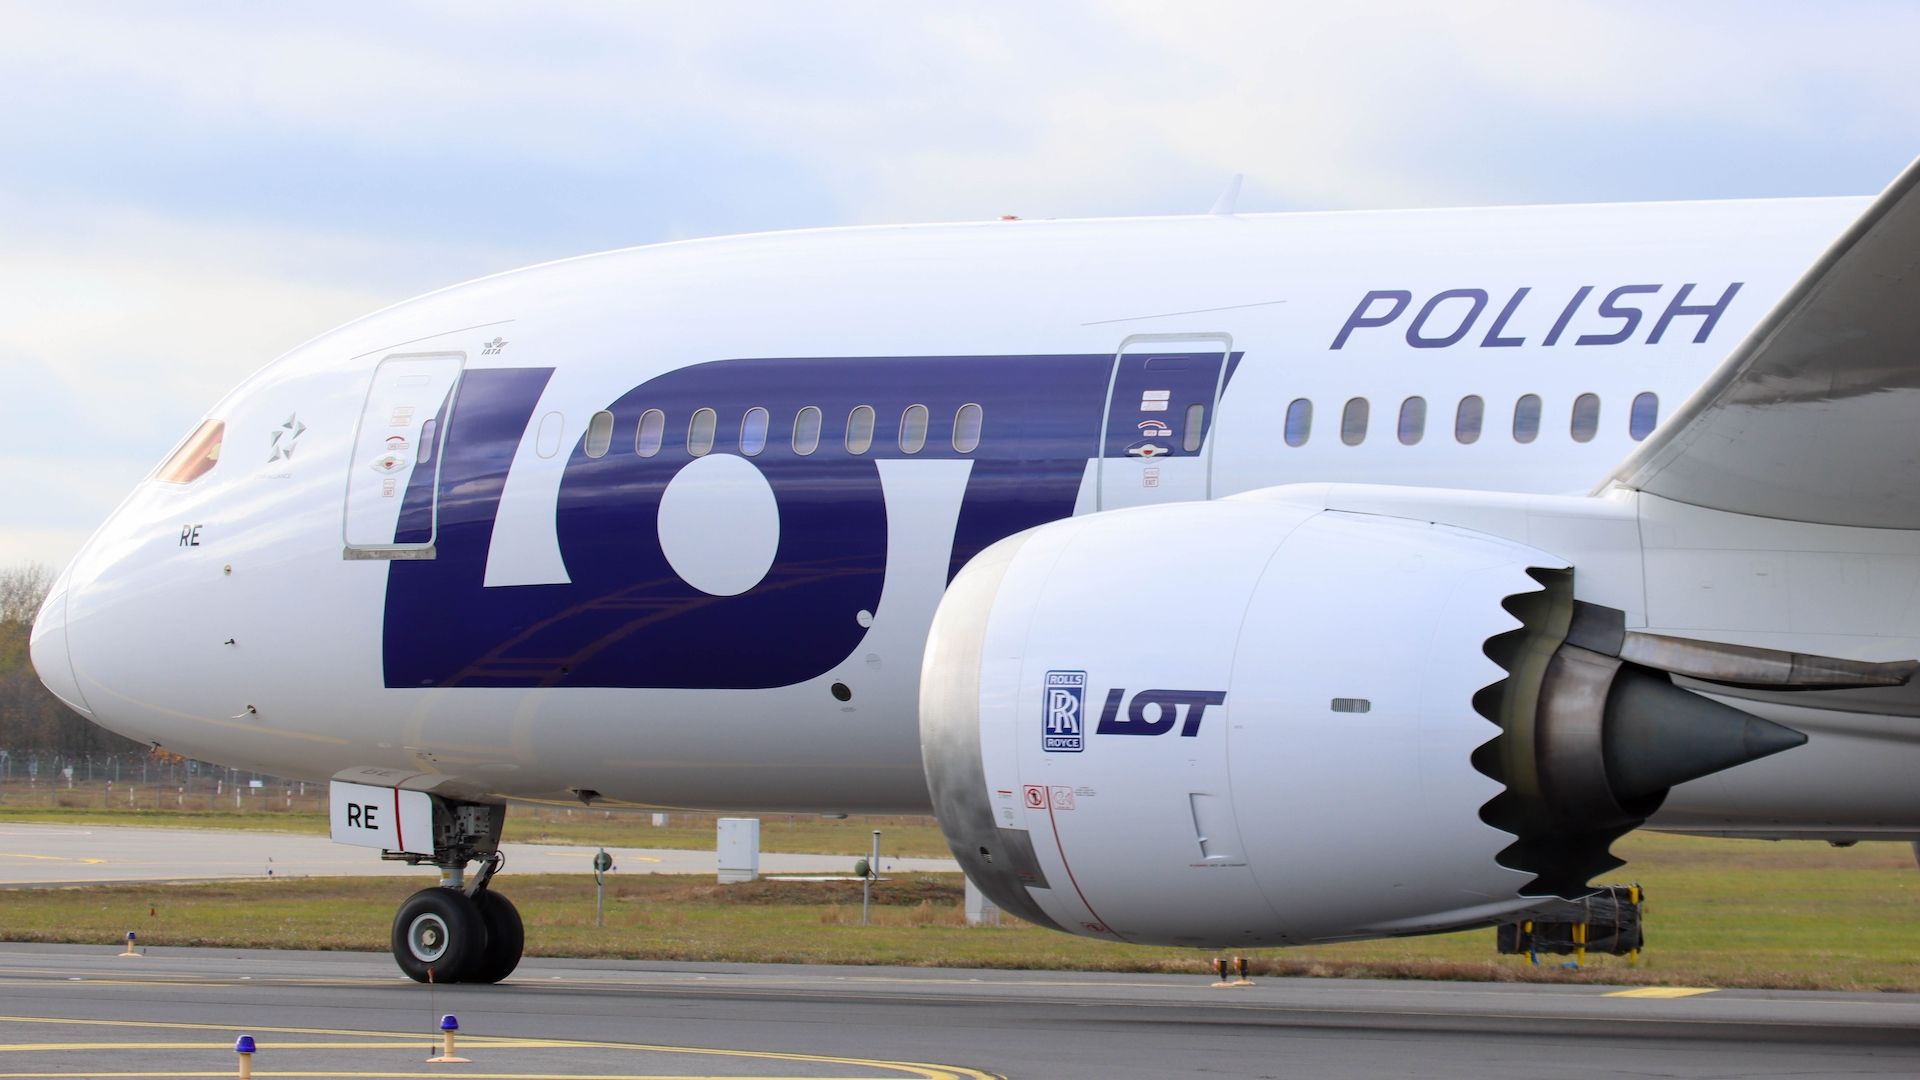 LOT Polish Airlines added a new photo. - LOT Polish Airlines